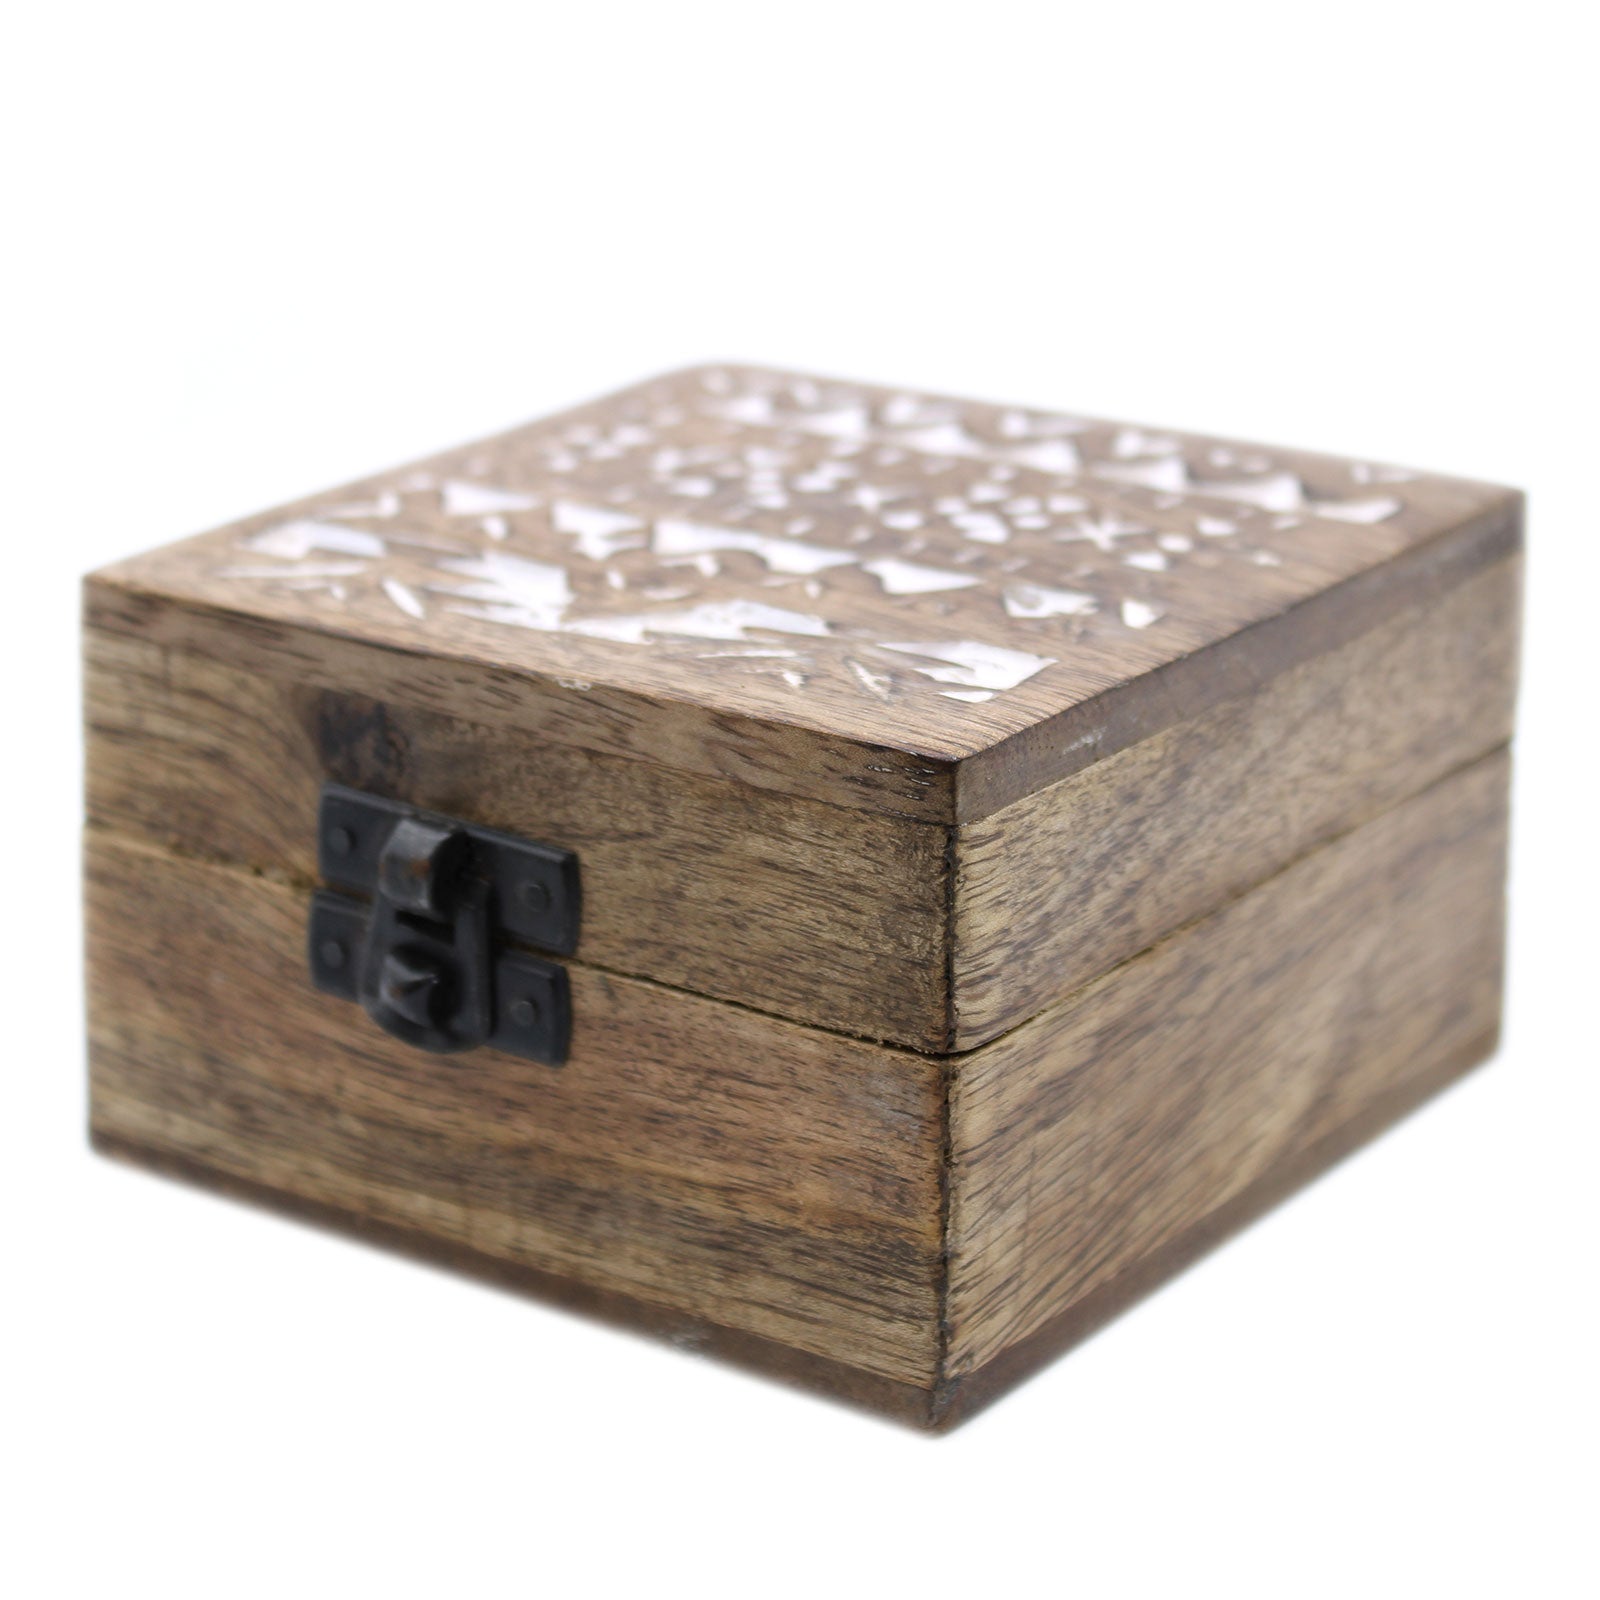 View White Washed Wooden Box 4x4 Slavic Design information